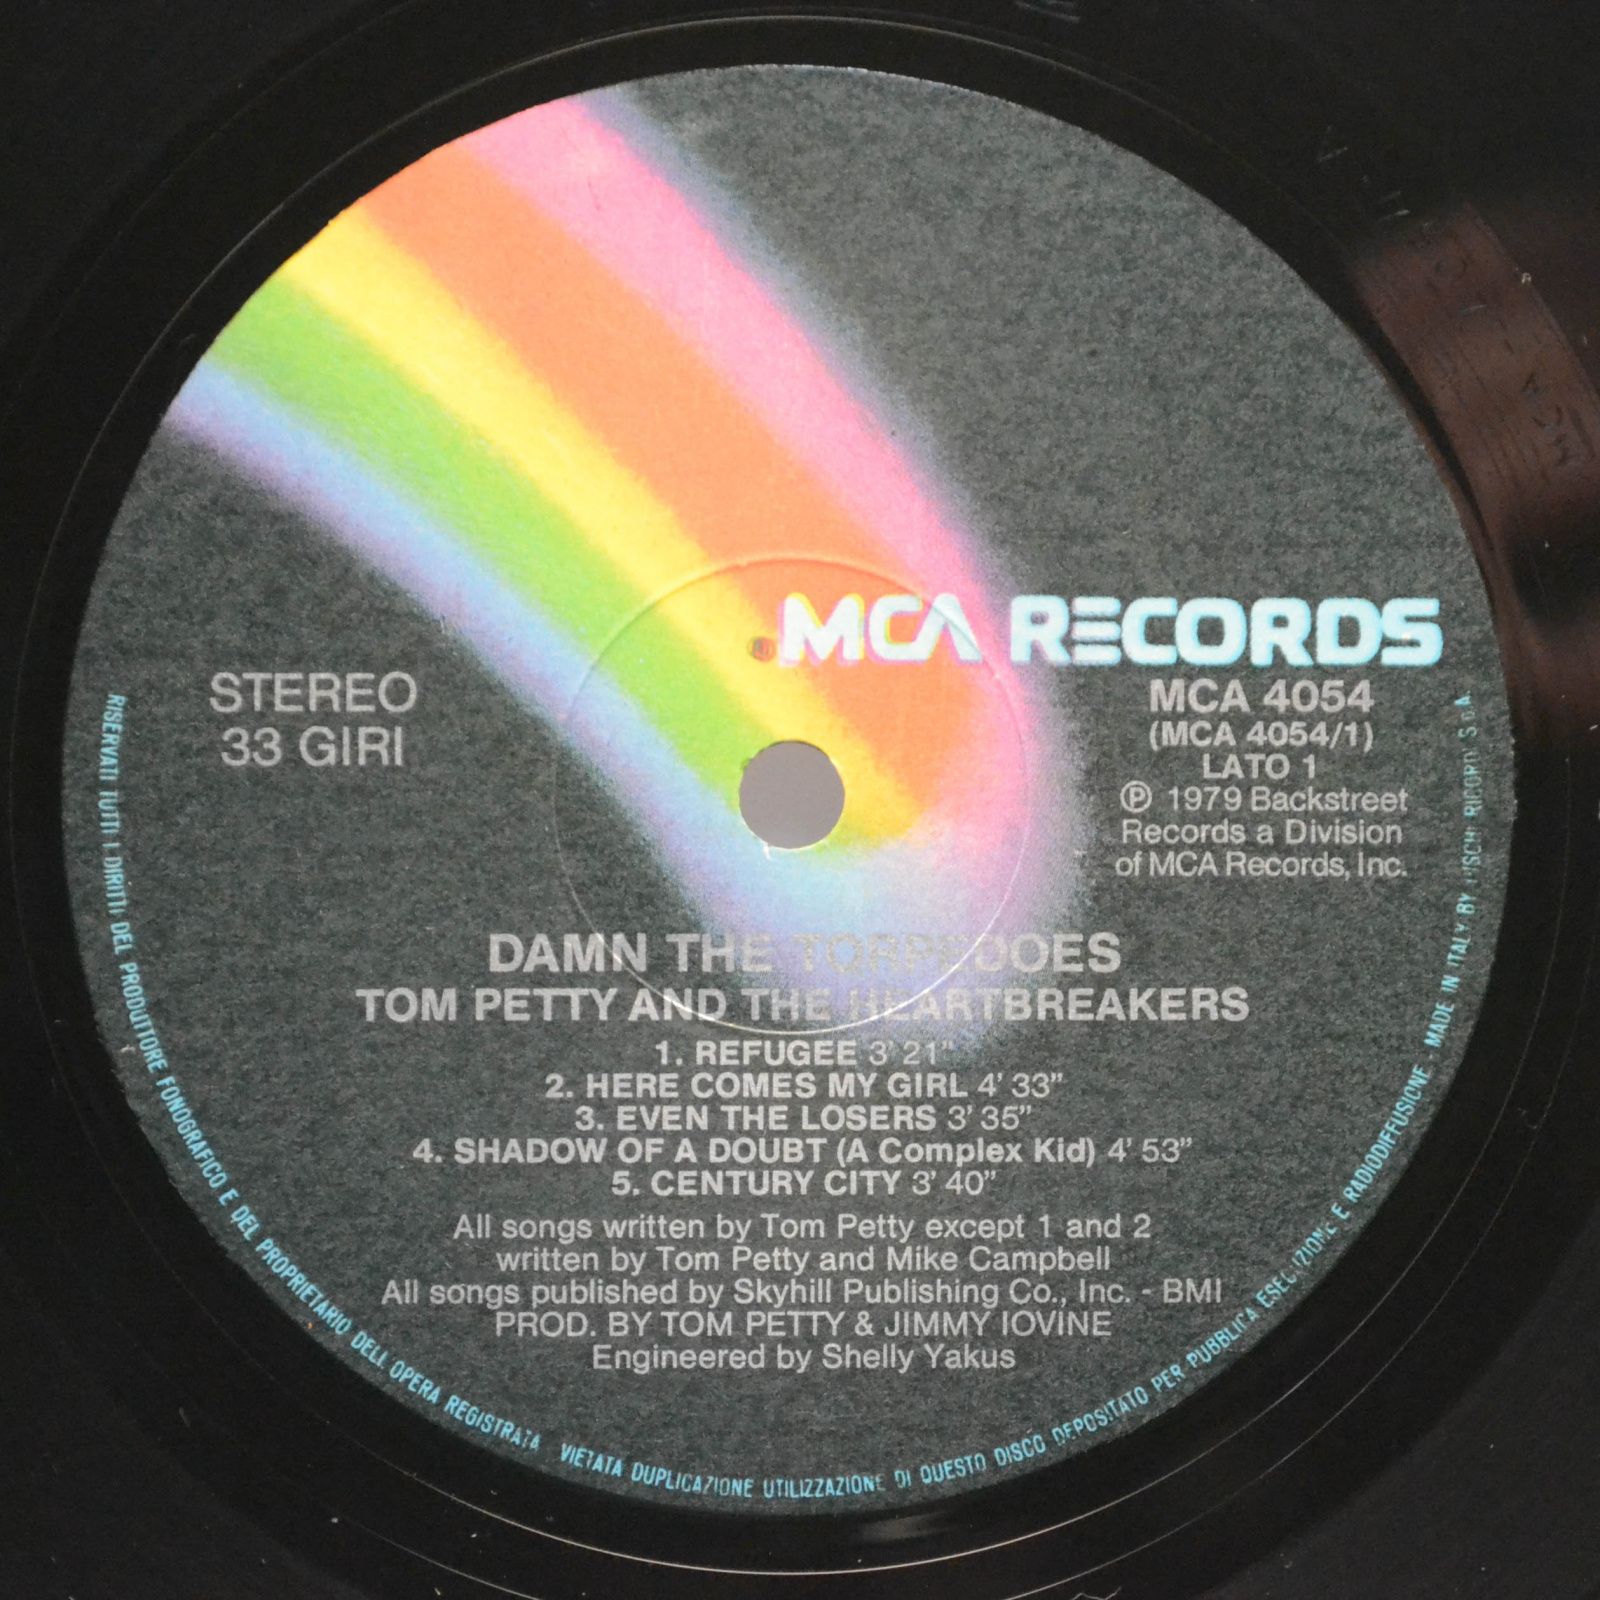 Tom Petty And The Heartbreakers — Damn The Torpedoes, 1979